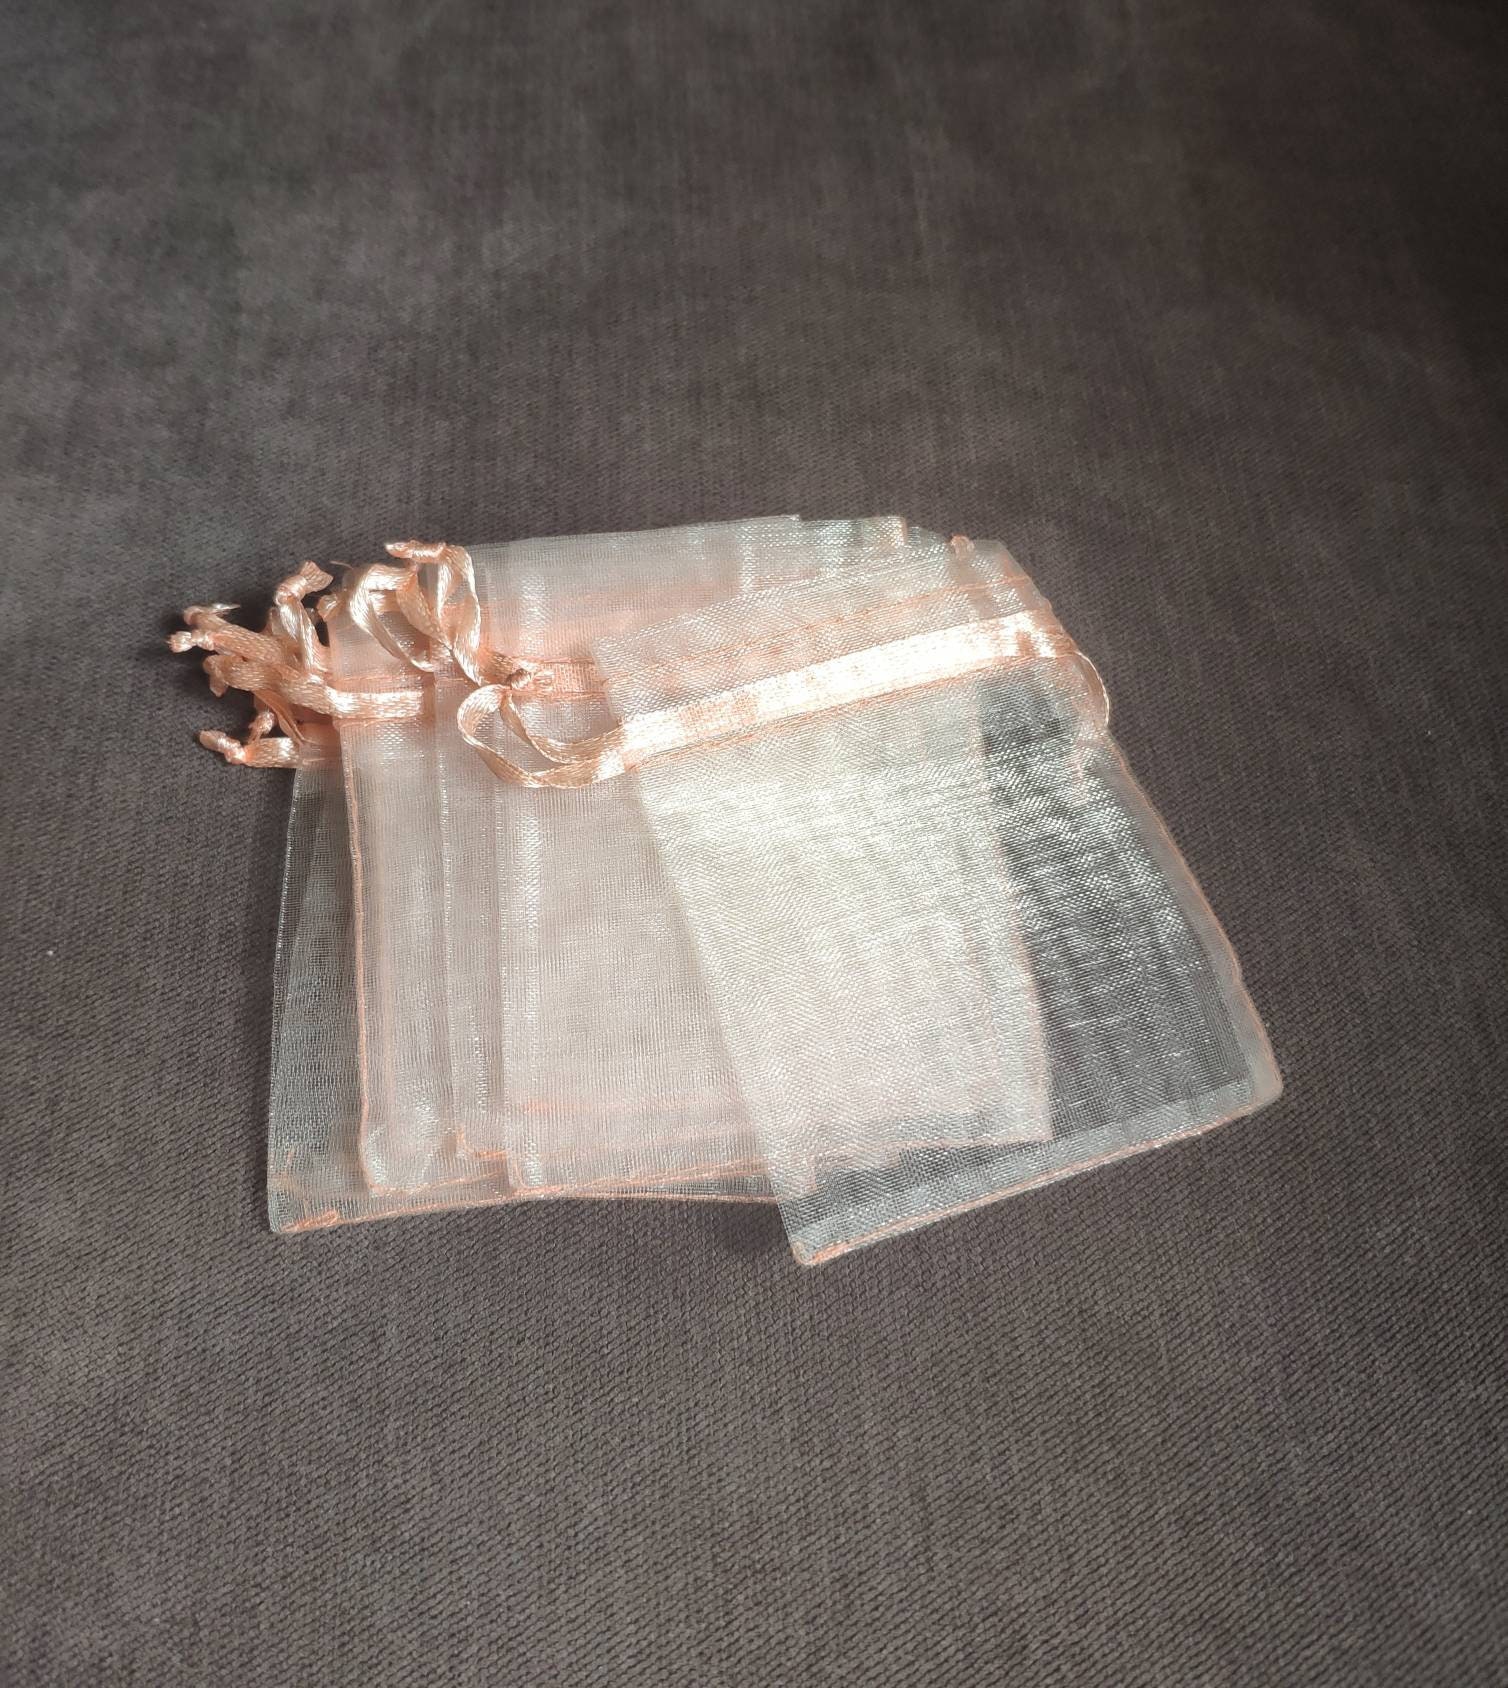 Organza Bags, Small Silky Bags, Christmas Wrapping, Gift Bags, Jewelry Bags,  Jewelry Making, Favour Bags, DIY Jewelry, Bulk Order, Craft 